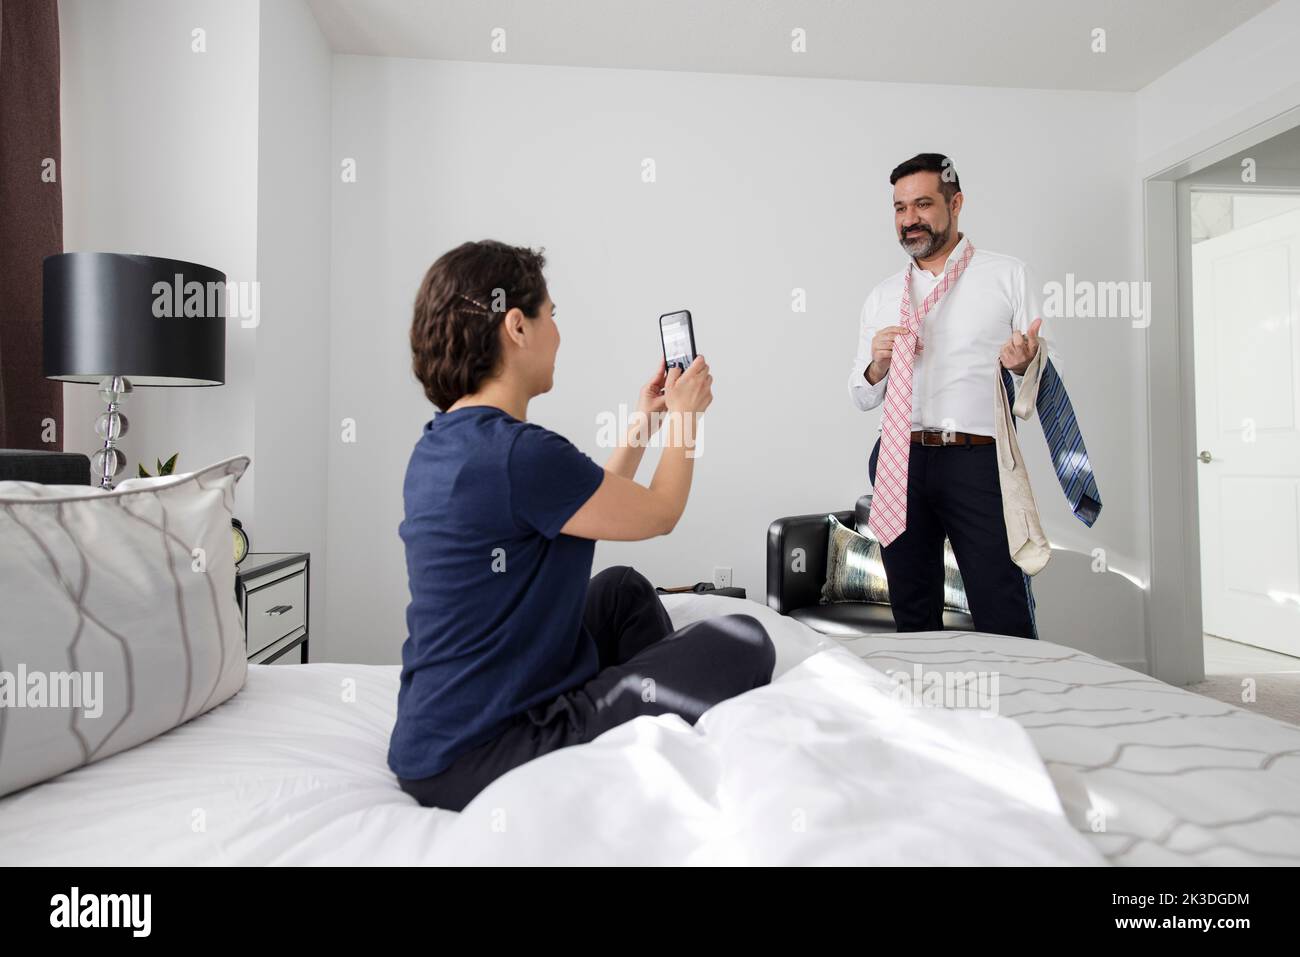 Wife with smart phone photographing husband trying on ties in bedroom Stock Photo